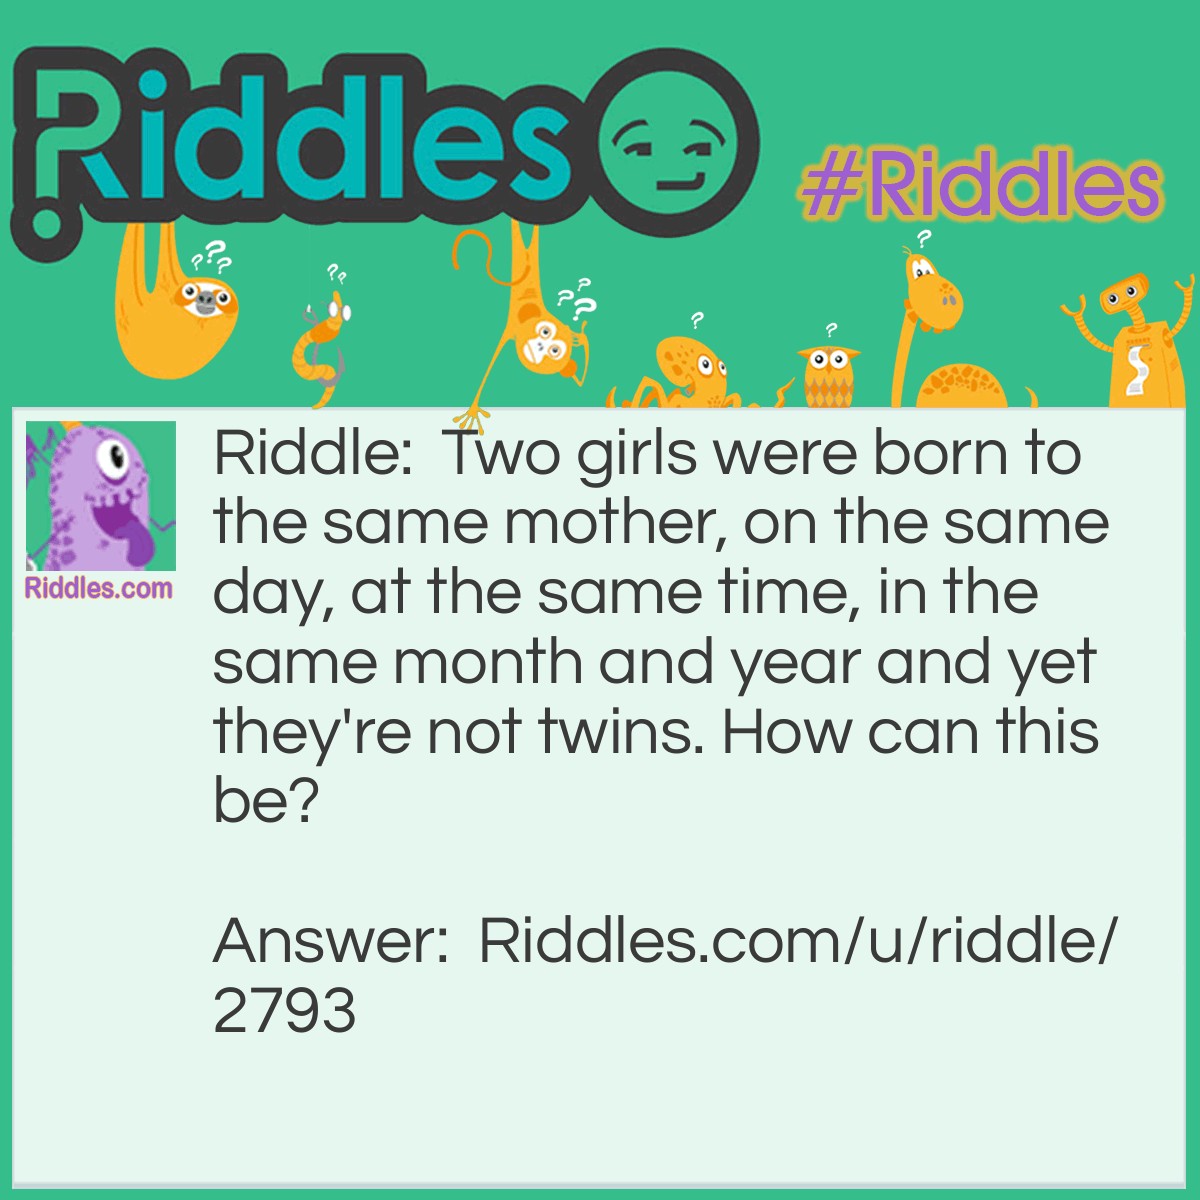 Riddle: Two girls were born to the same mother, on the same day, at the same time, in the same month and year and yet they're not twins. How can this be? Answer: The two babies are two of a set of triplets.